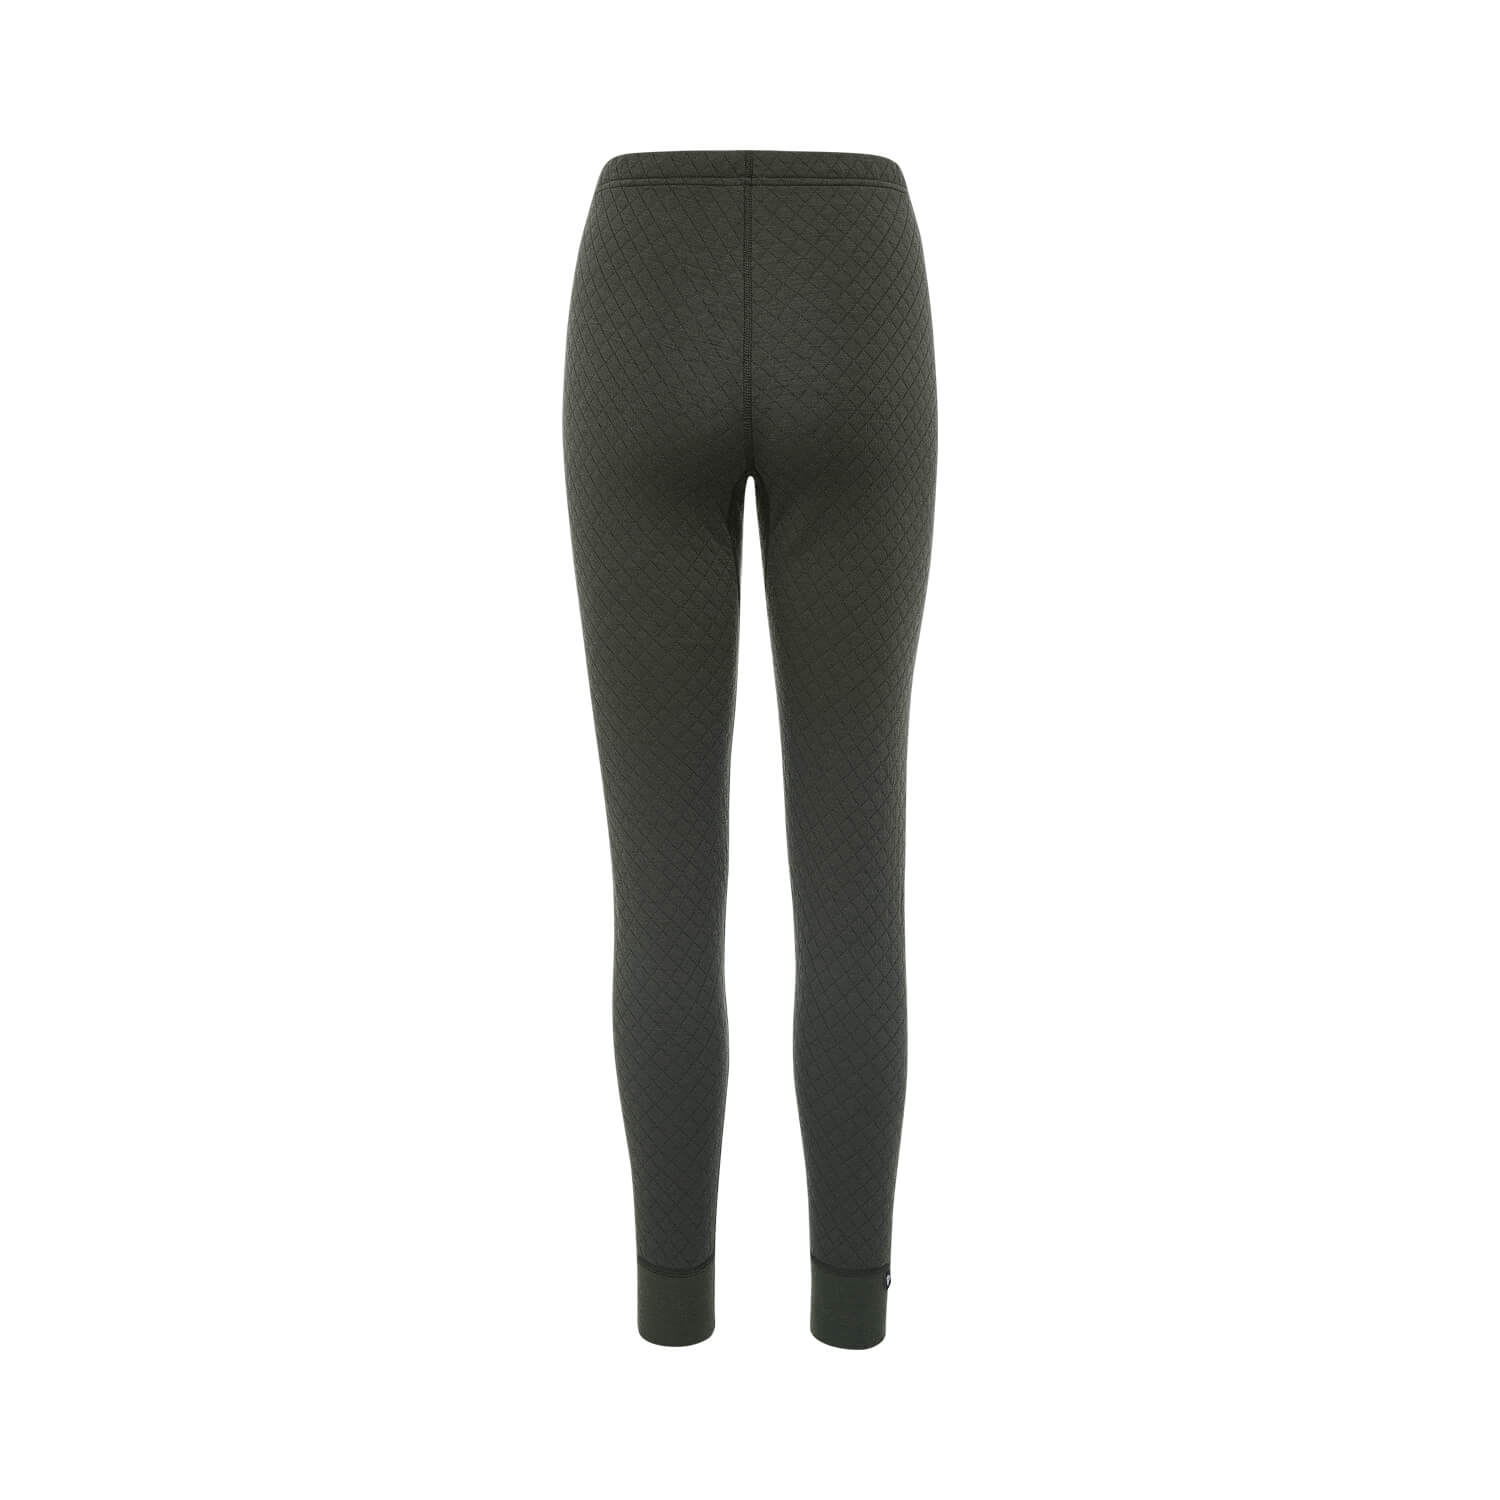 Thermowave long pants ladies 3in1